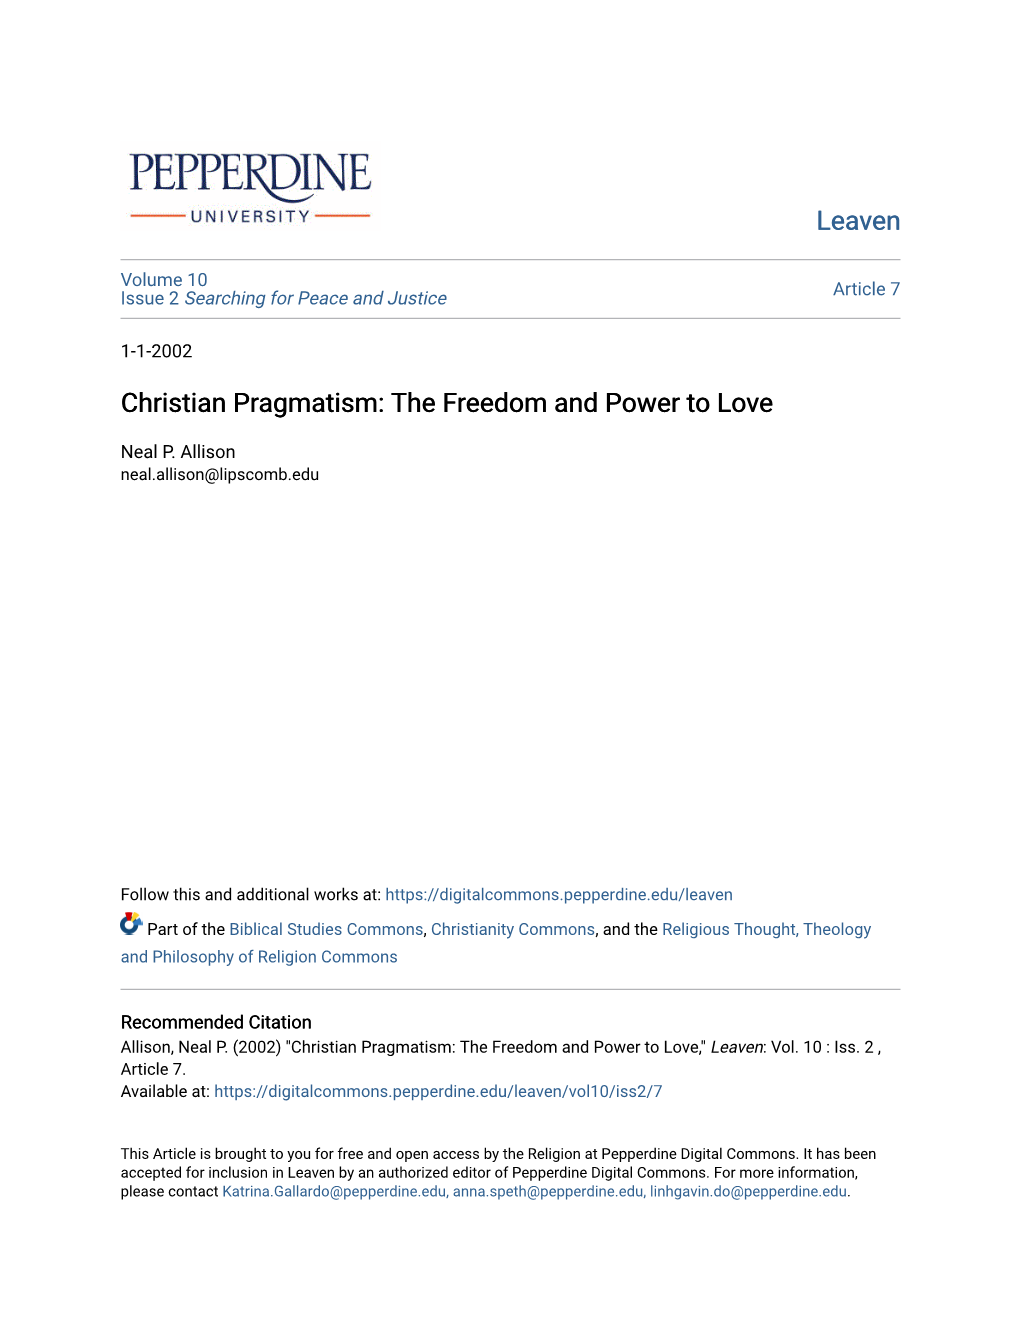 Christian Pragmatism: the Freedom and Power to Love